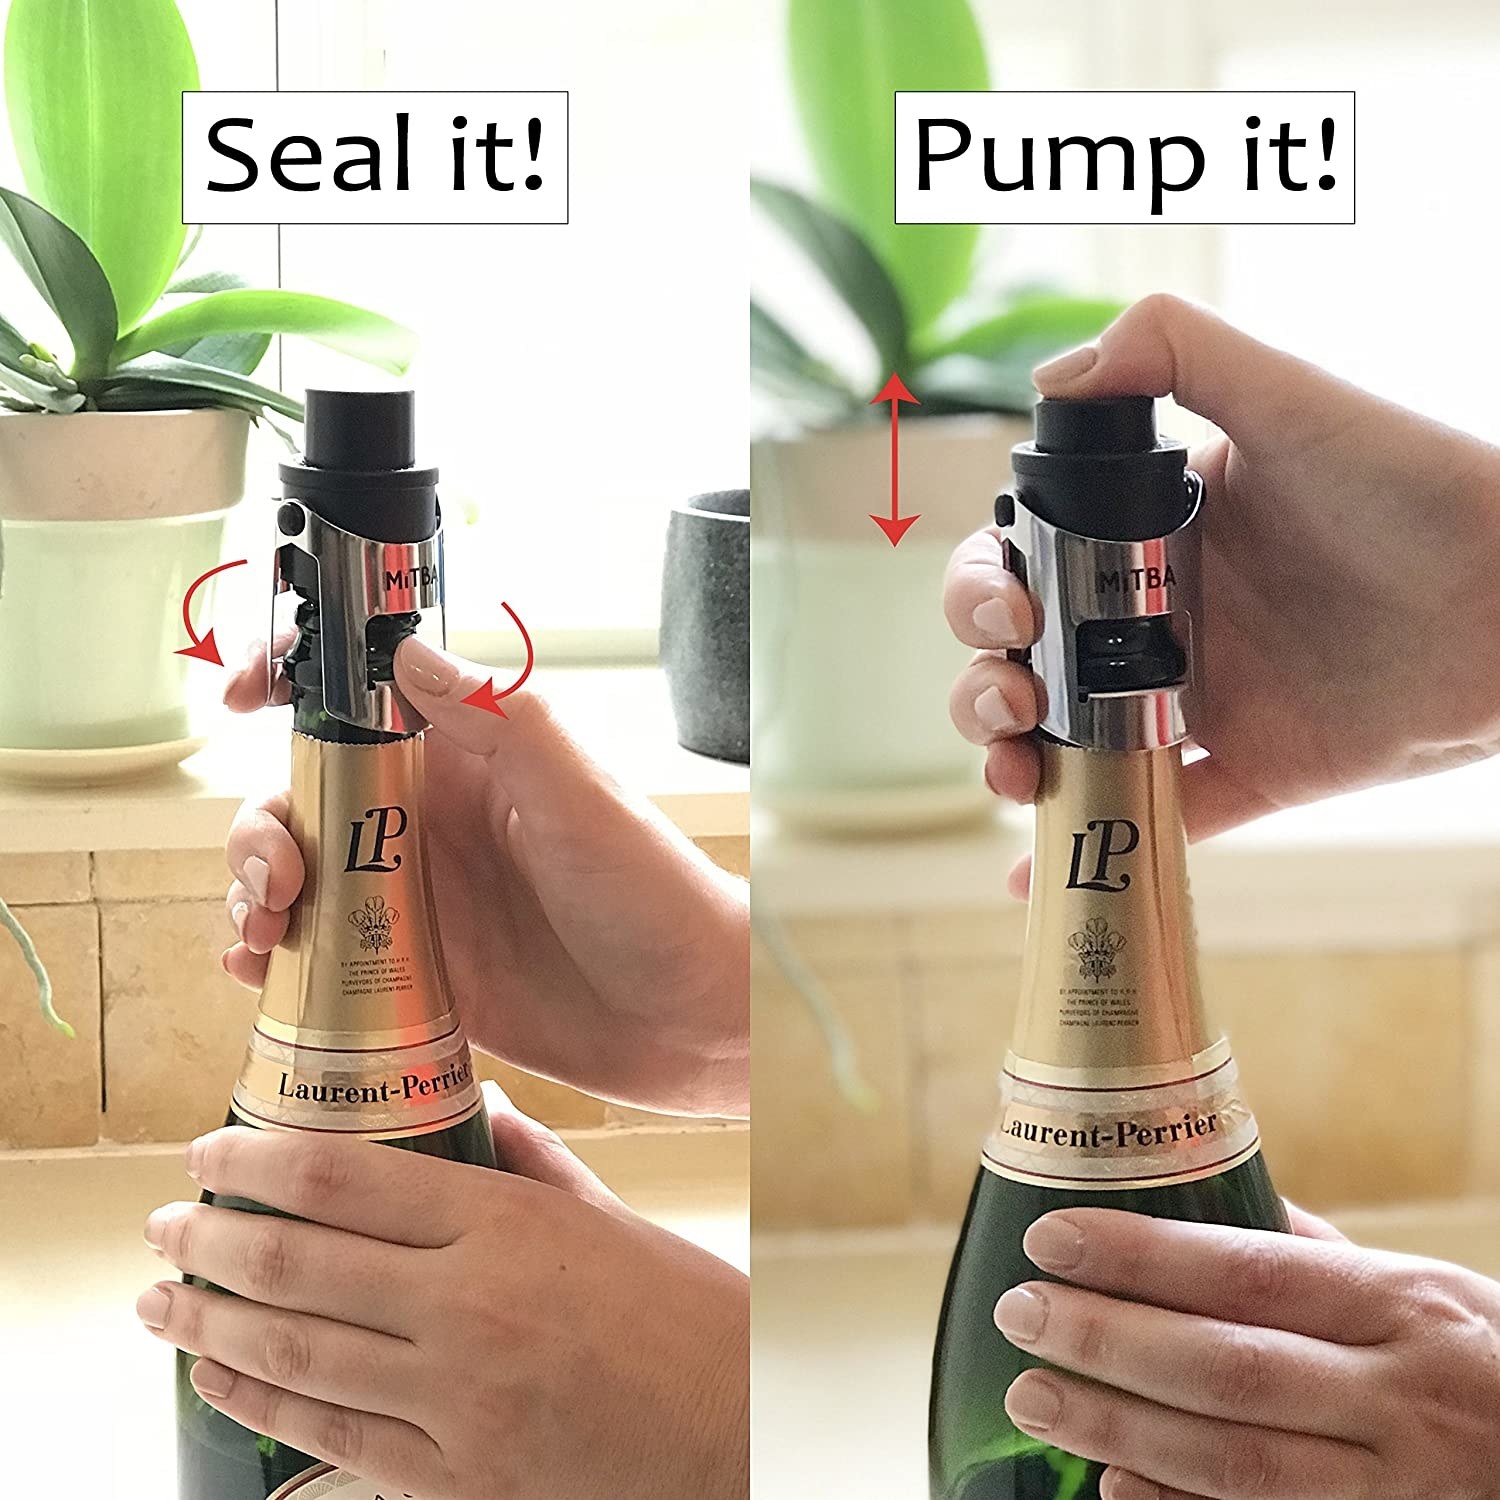 A model sealing and then pumping the saver cap on a bottle of wine 